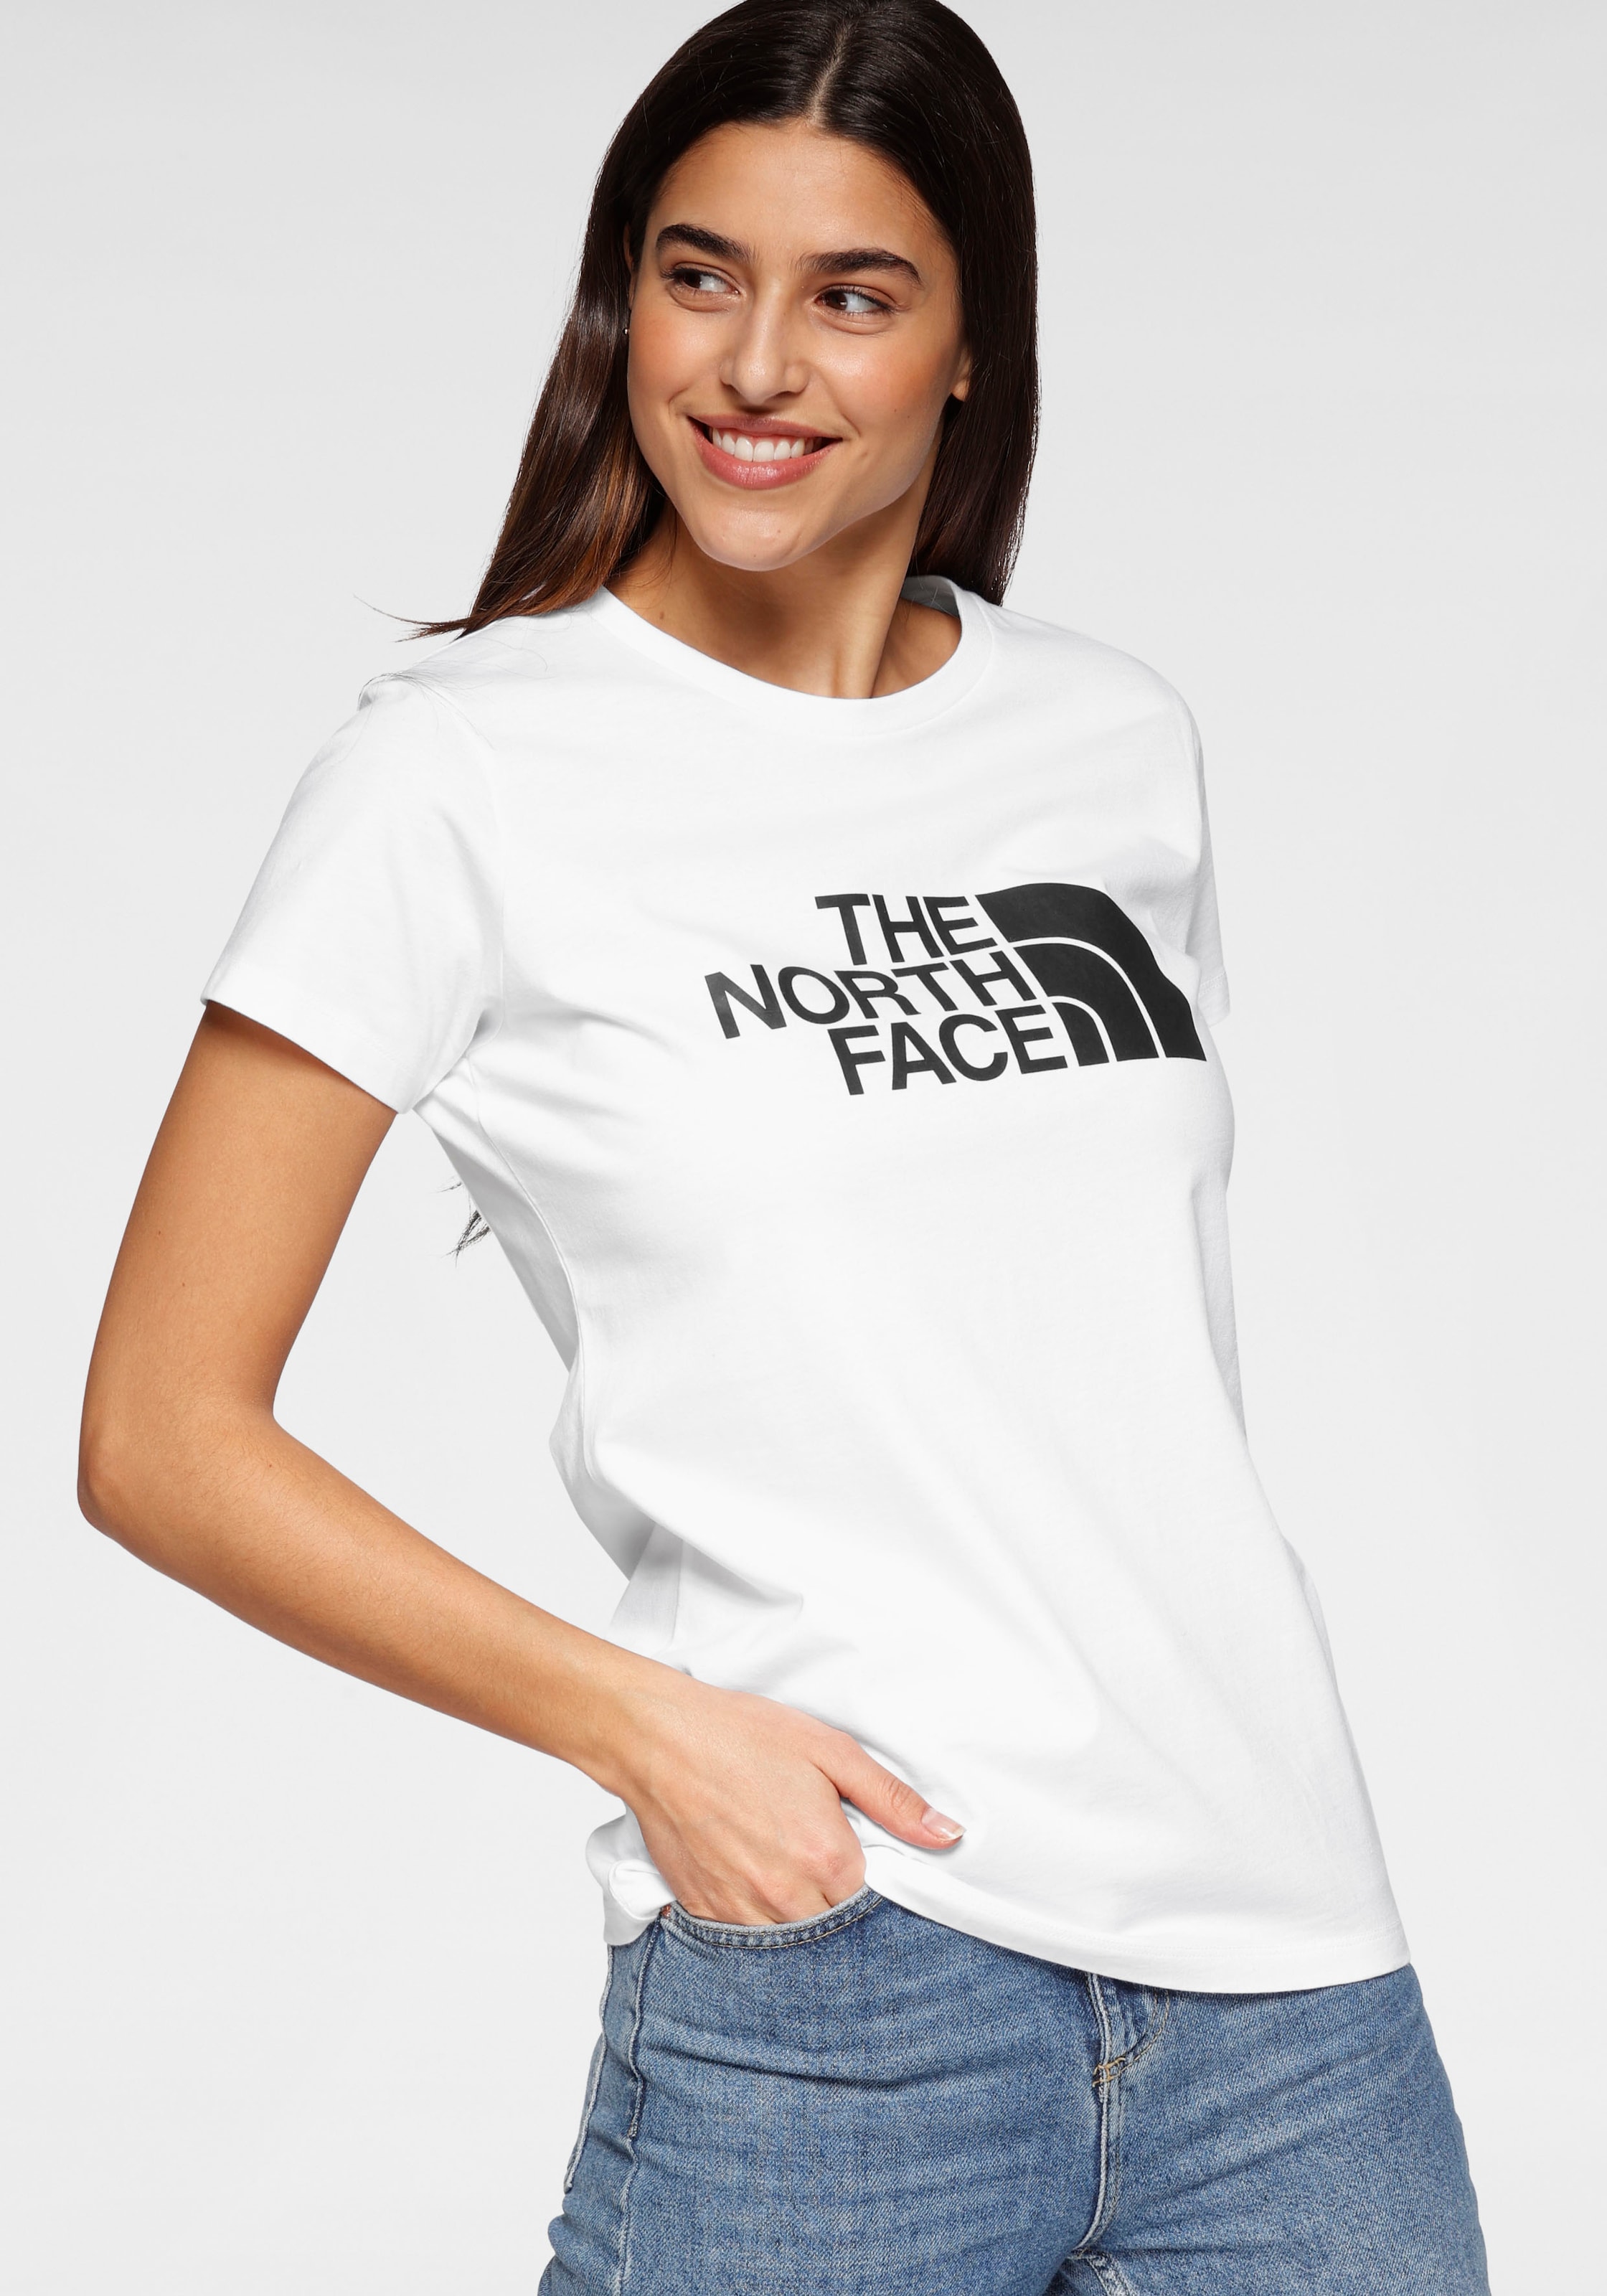 T-Shirt Shop OTTO Online im The Face North